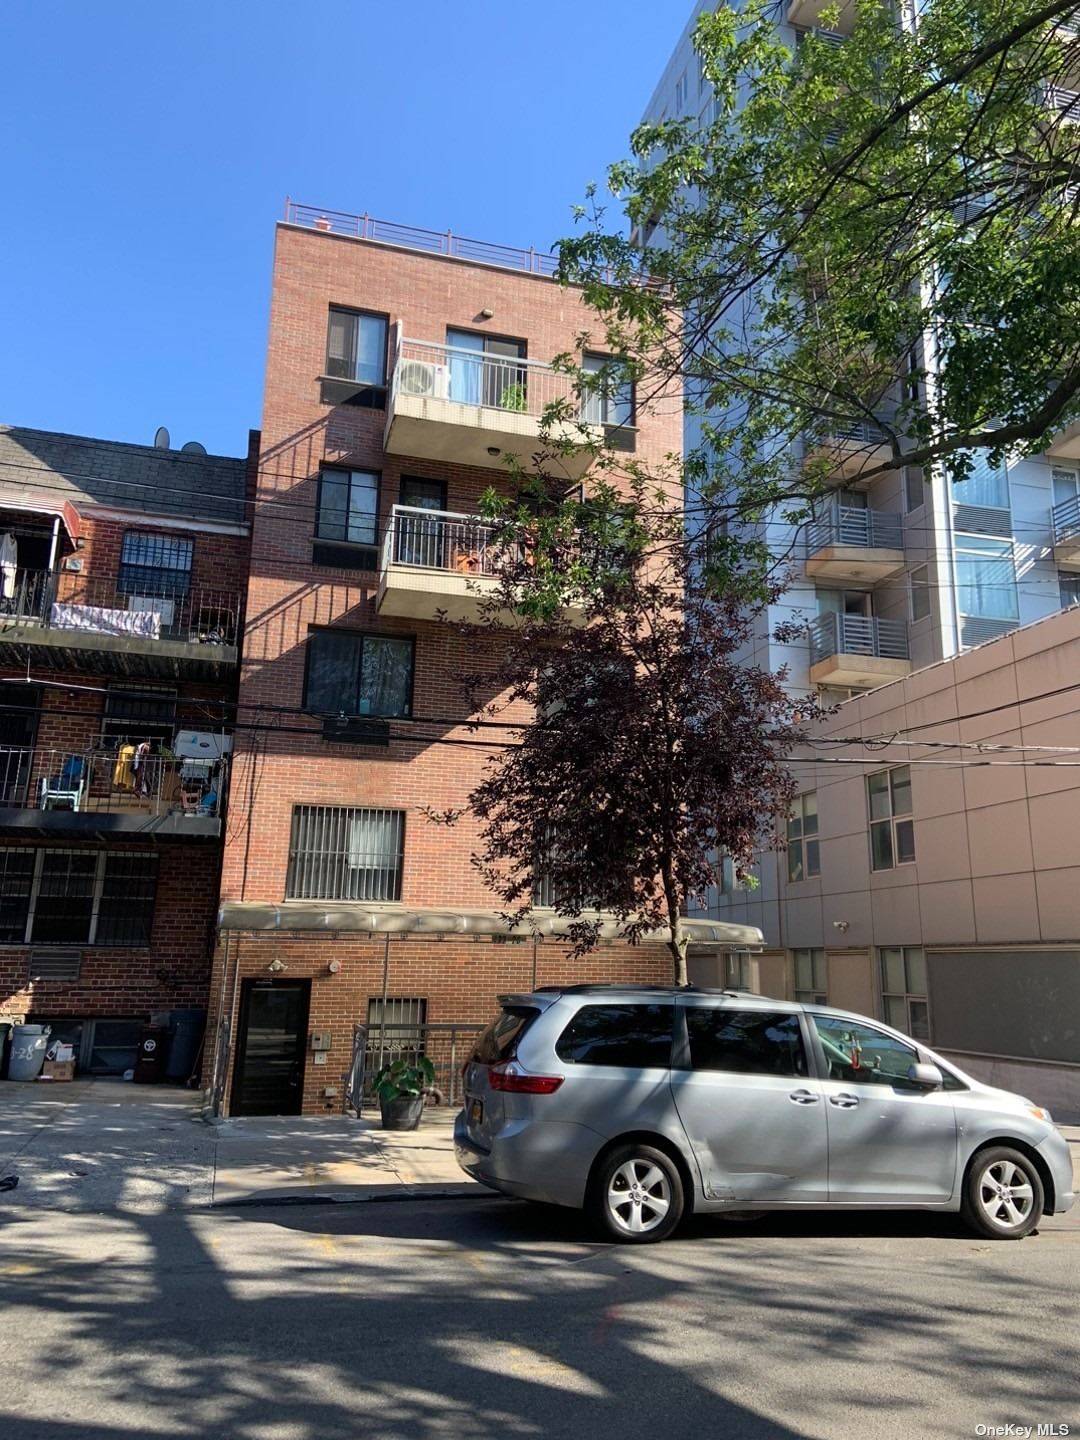 Location ! in the heart of Flushing, one block away from Main st, close super market, restaurant, banks, and close to No.